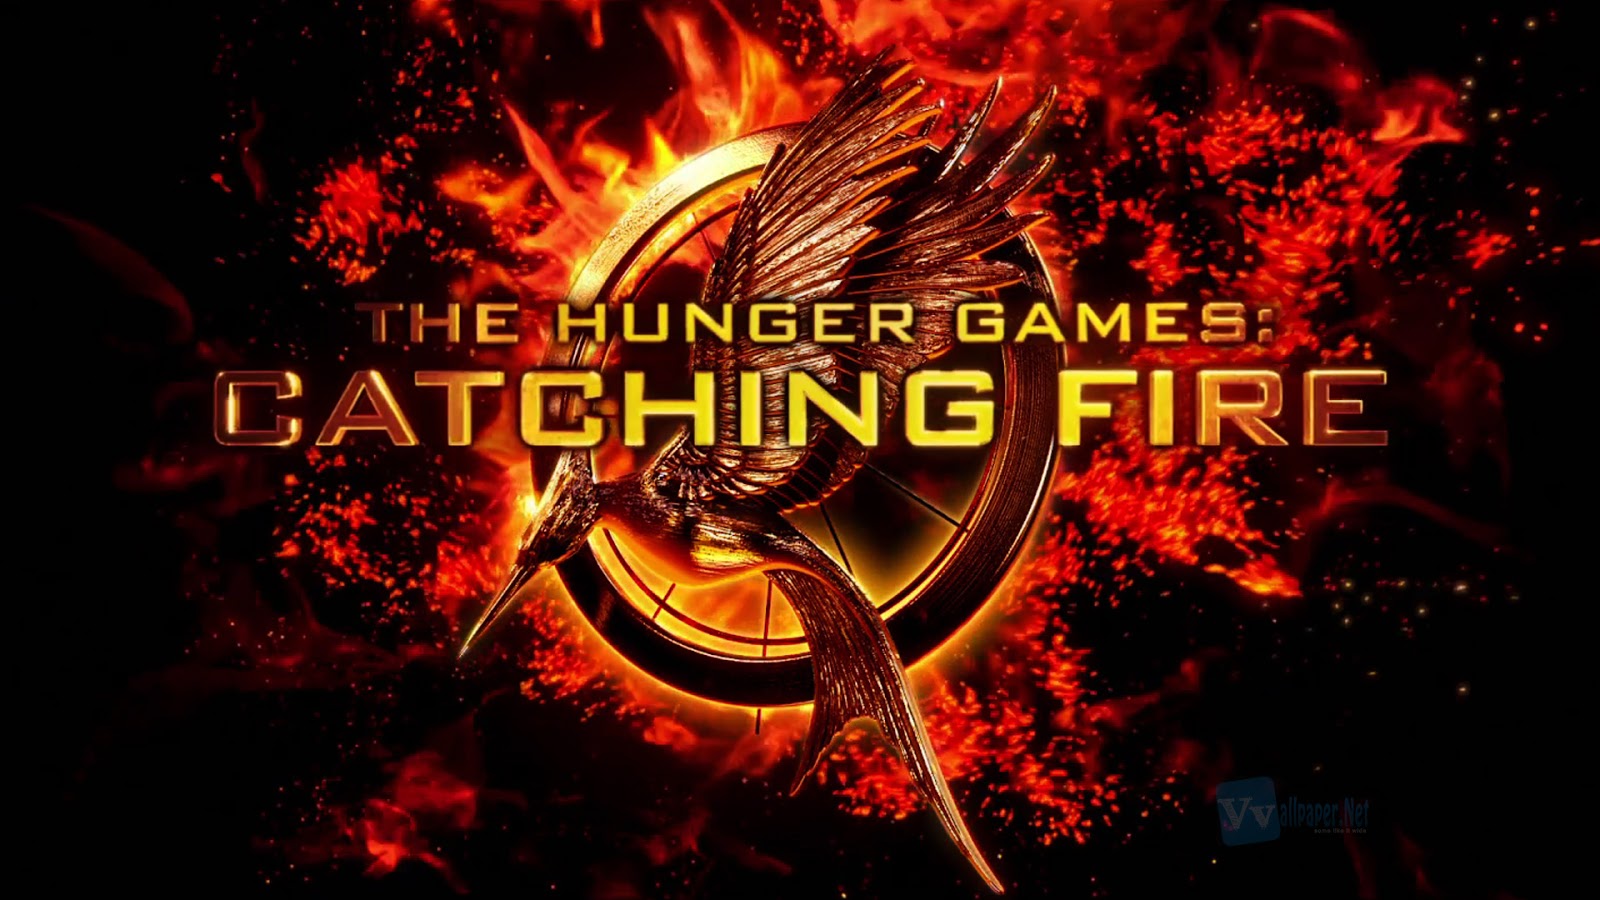 World of reel. Hunger games catching Fire. Fire and Hunger игра.